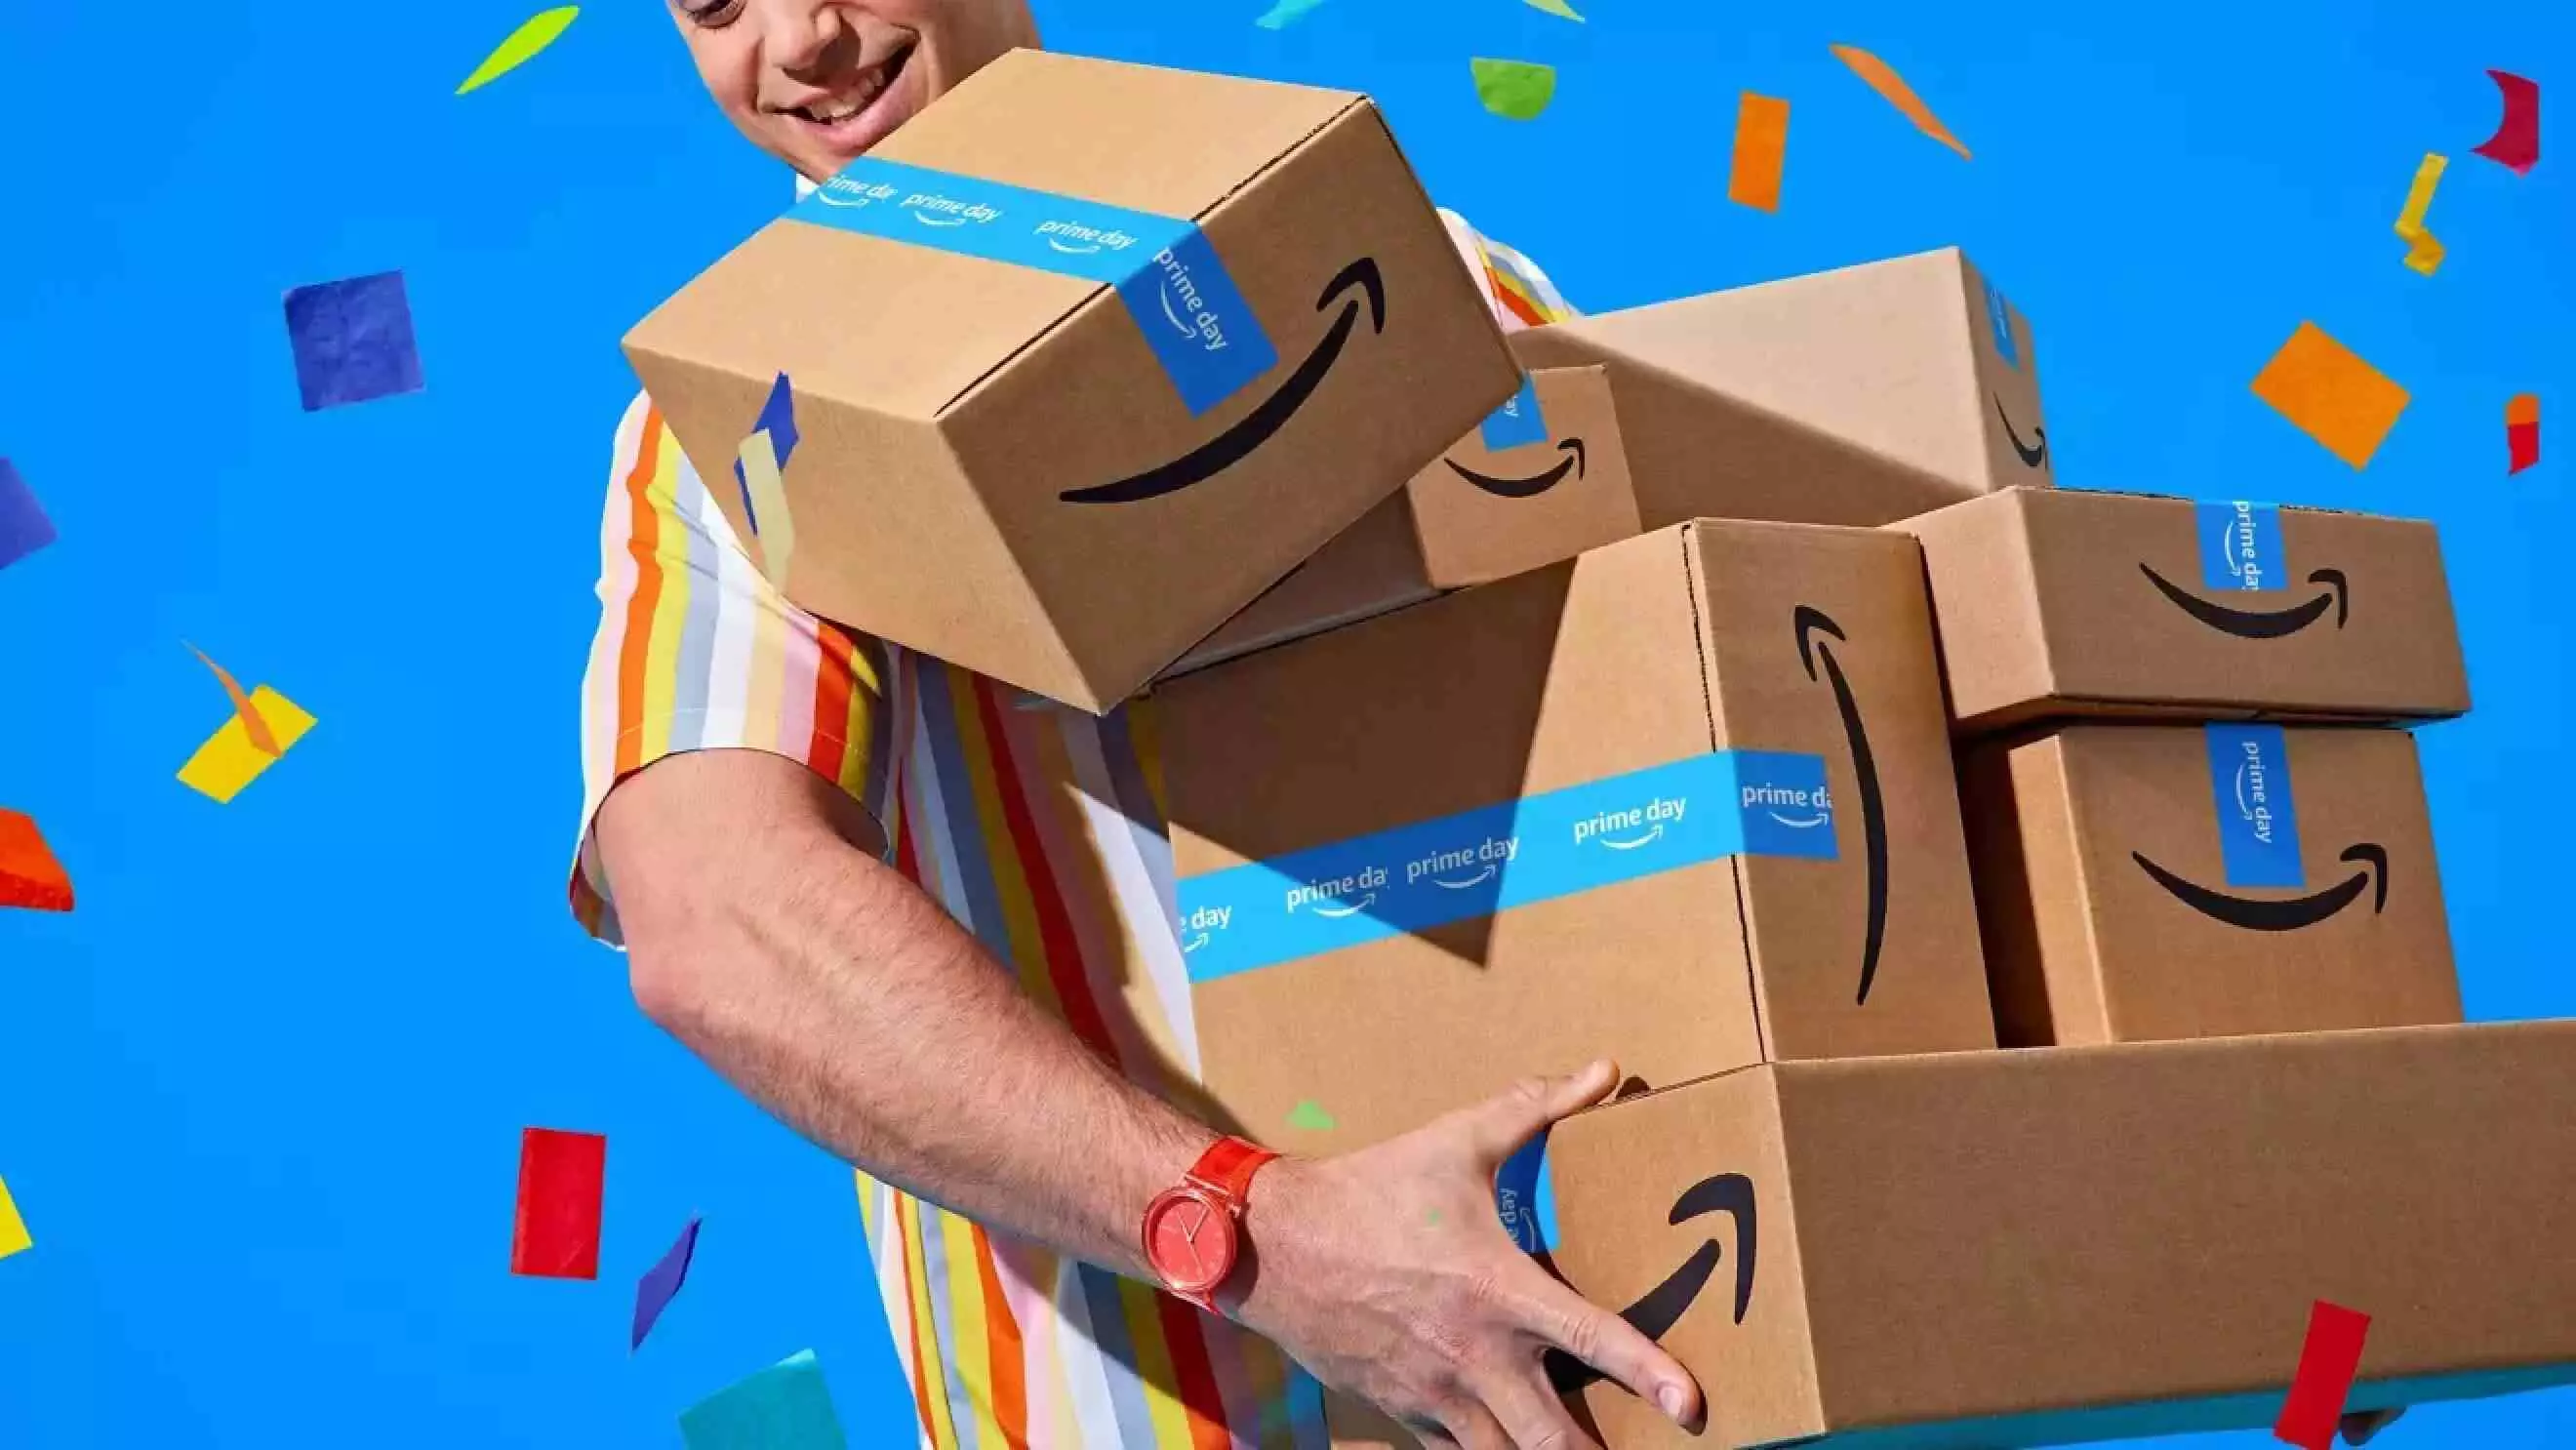 Amazon announces 7th edition of Prime Day as the biggest ever Prime Day event